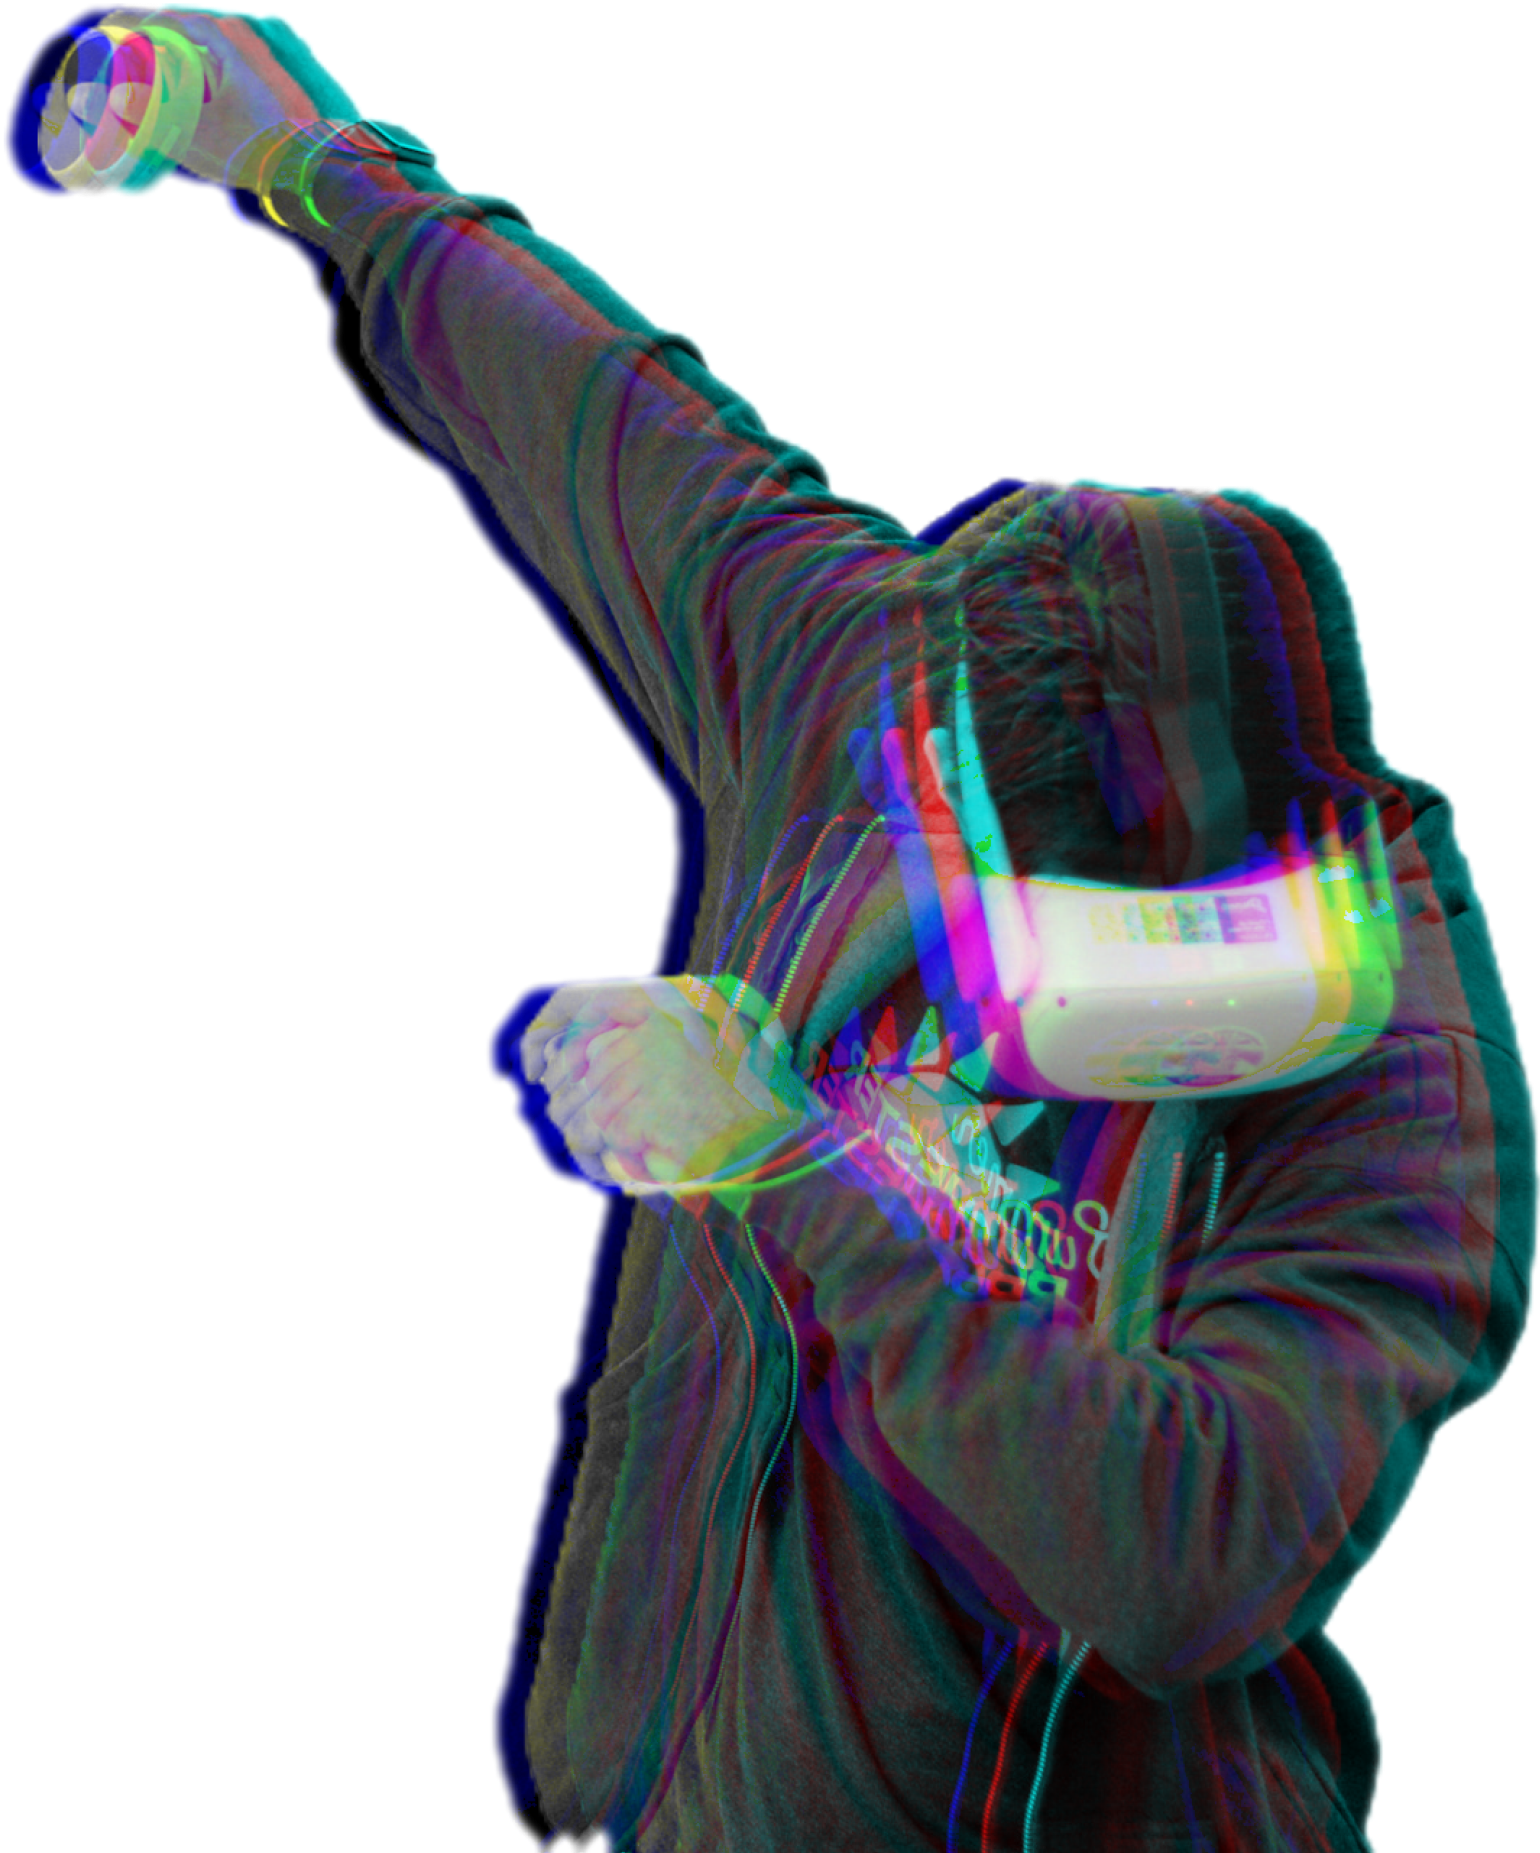 A student is dabbing while wearing a VR headset.